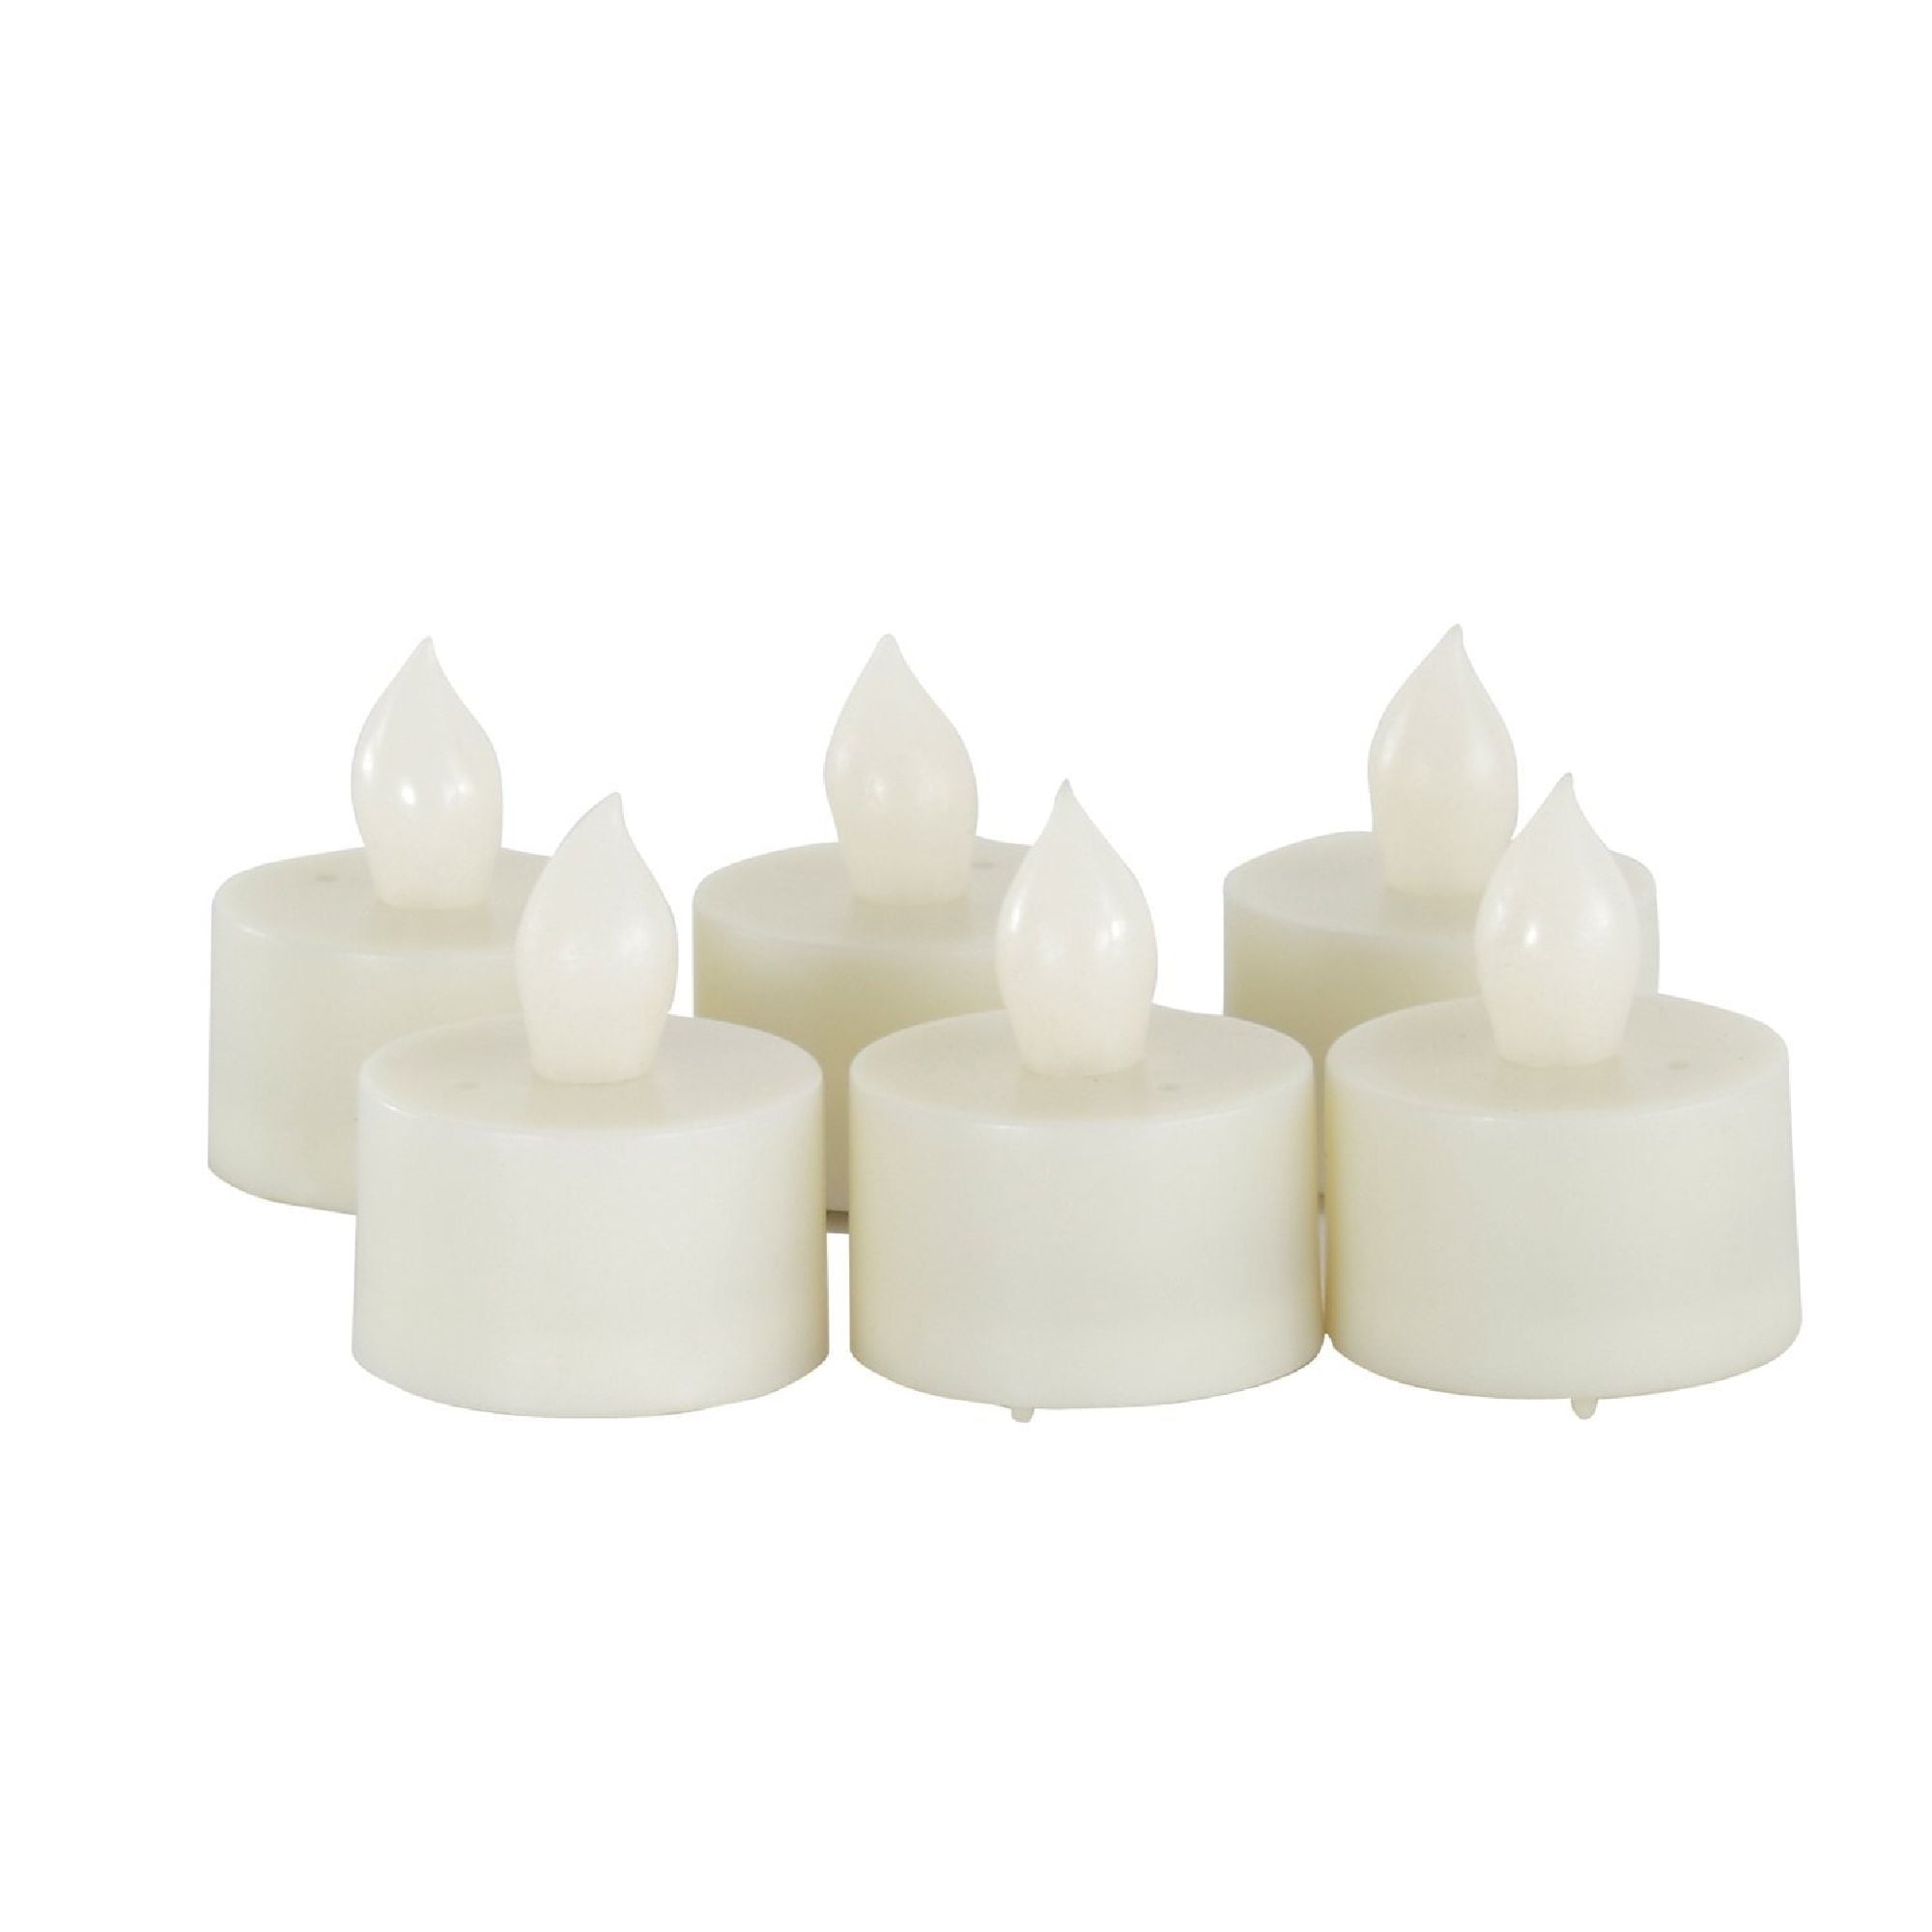 50 Tea Lights Realistic and Bright Flickering Battery Operated LED Tea Light, 